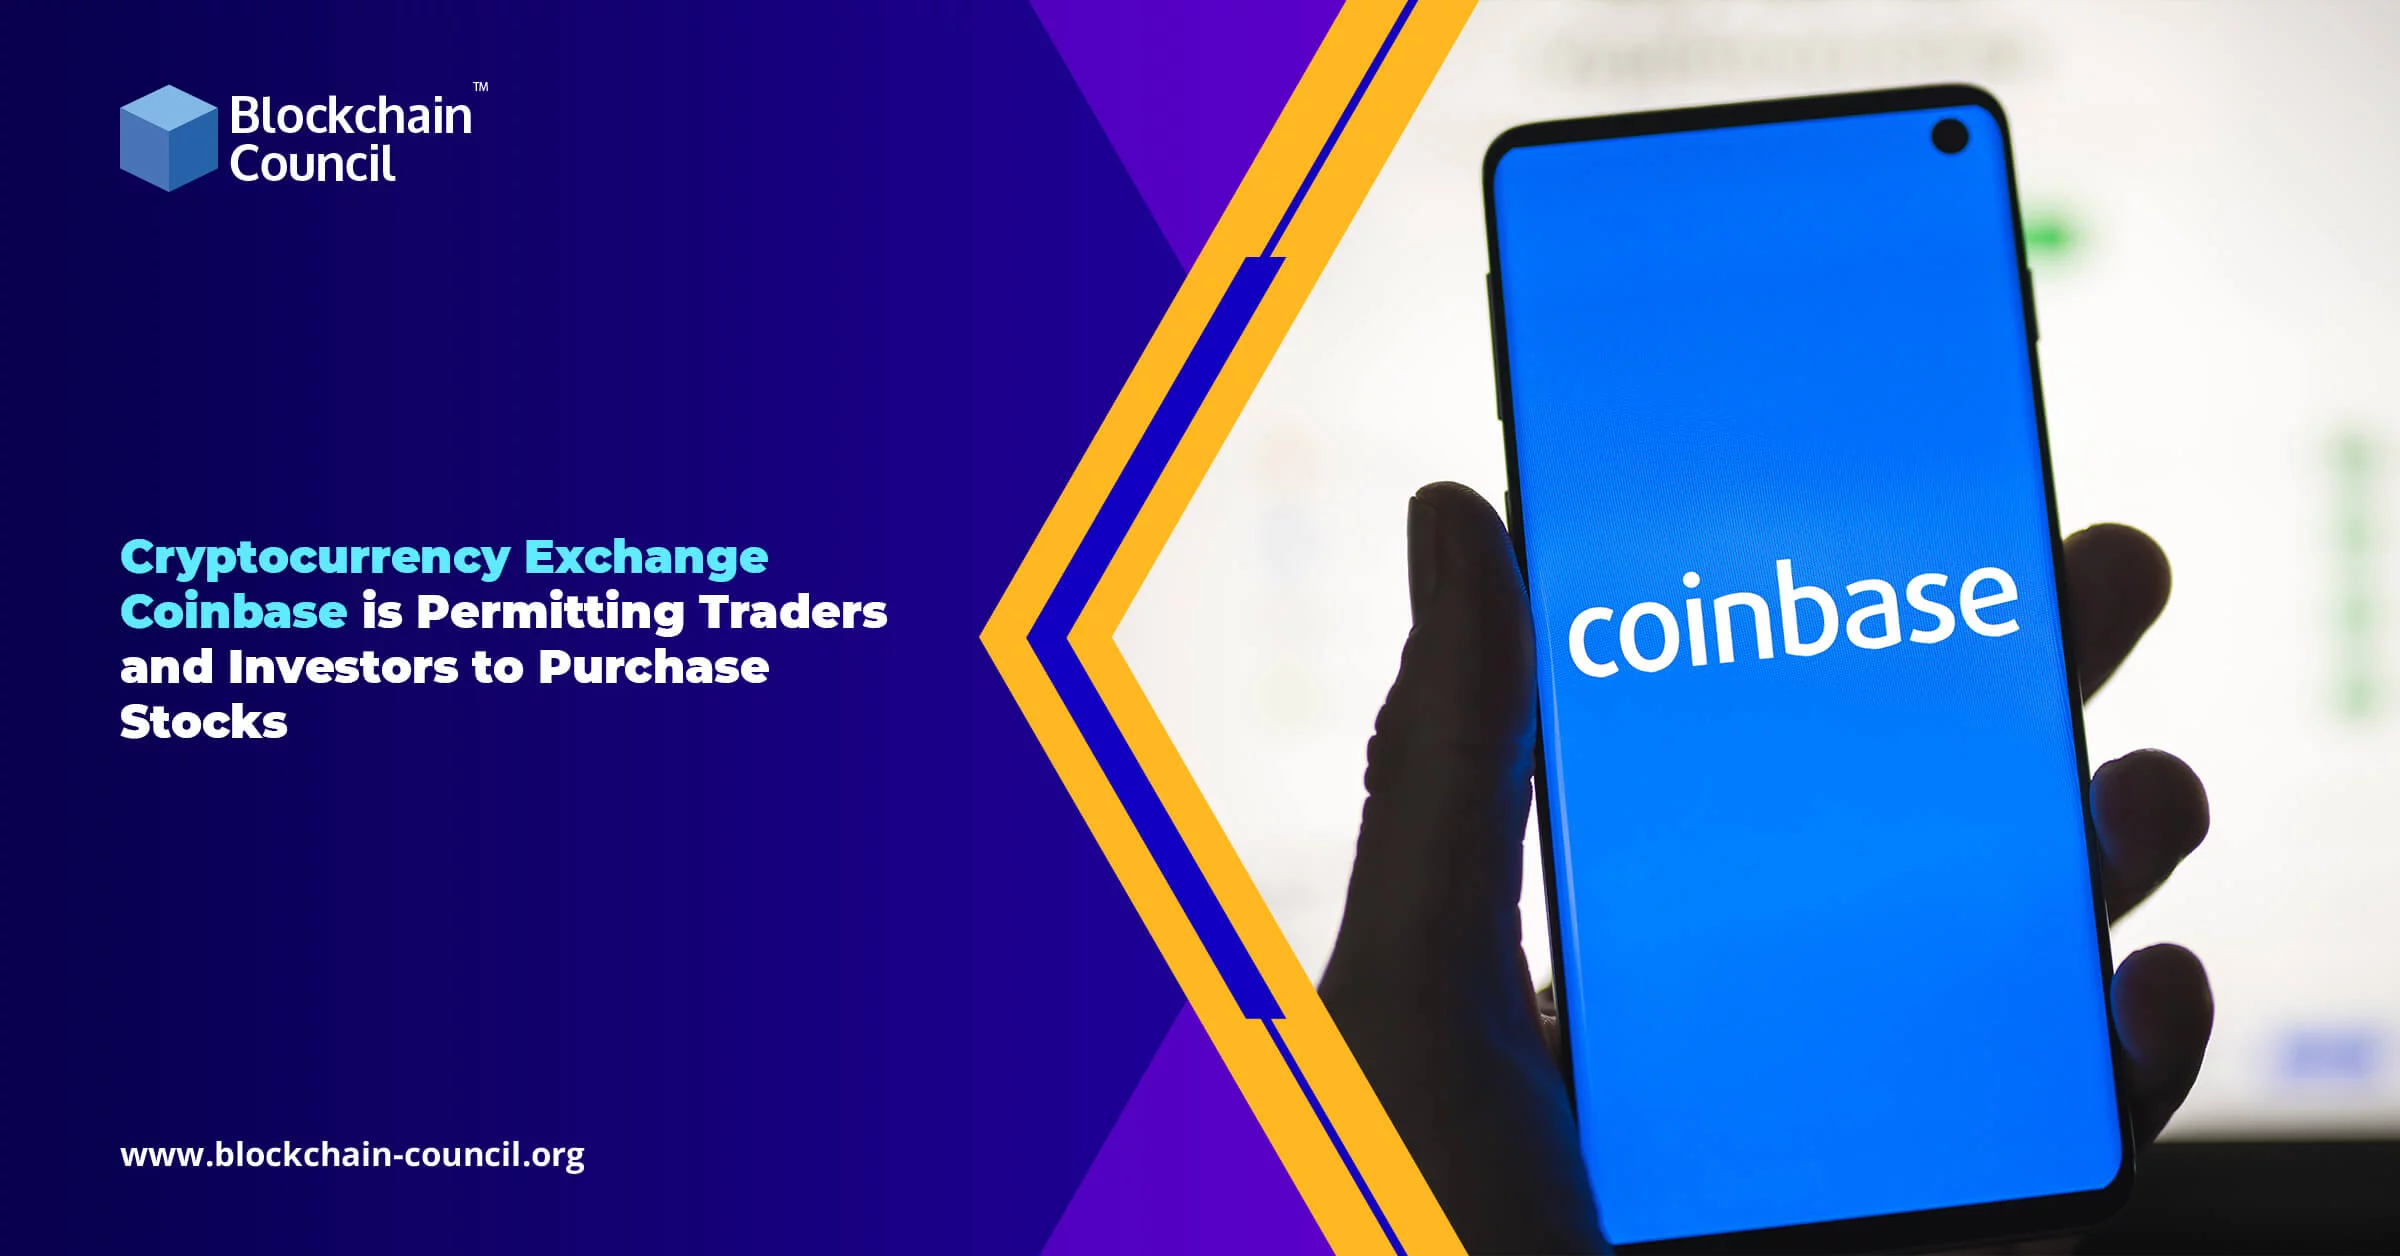 Cryptocurrency Exchange Coinbase is Permitting Traders and Investors to Purchase Stocks